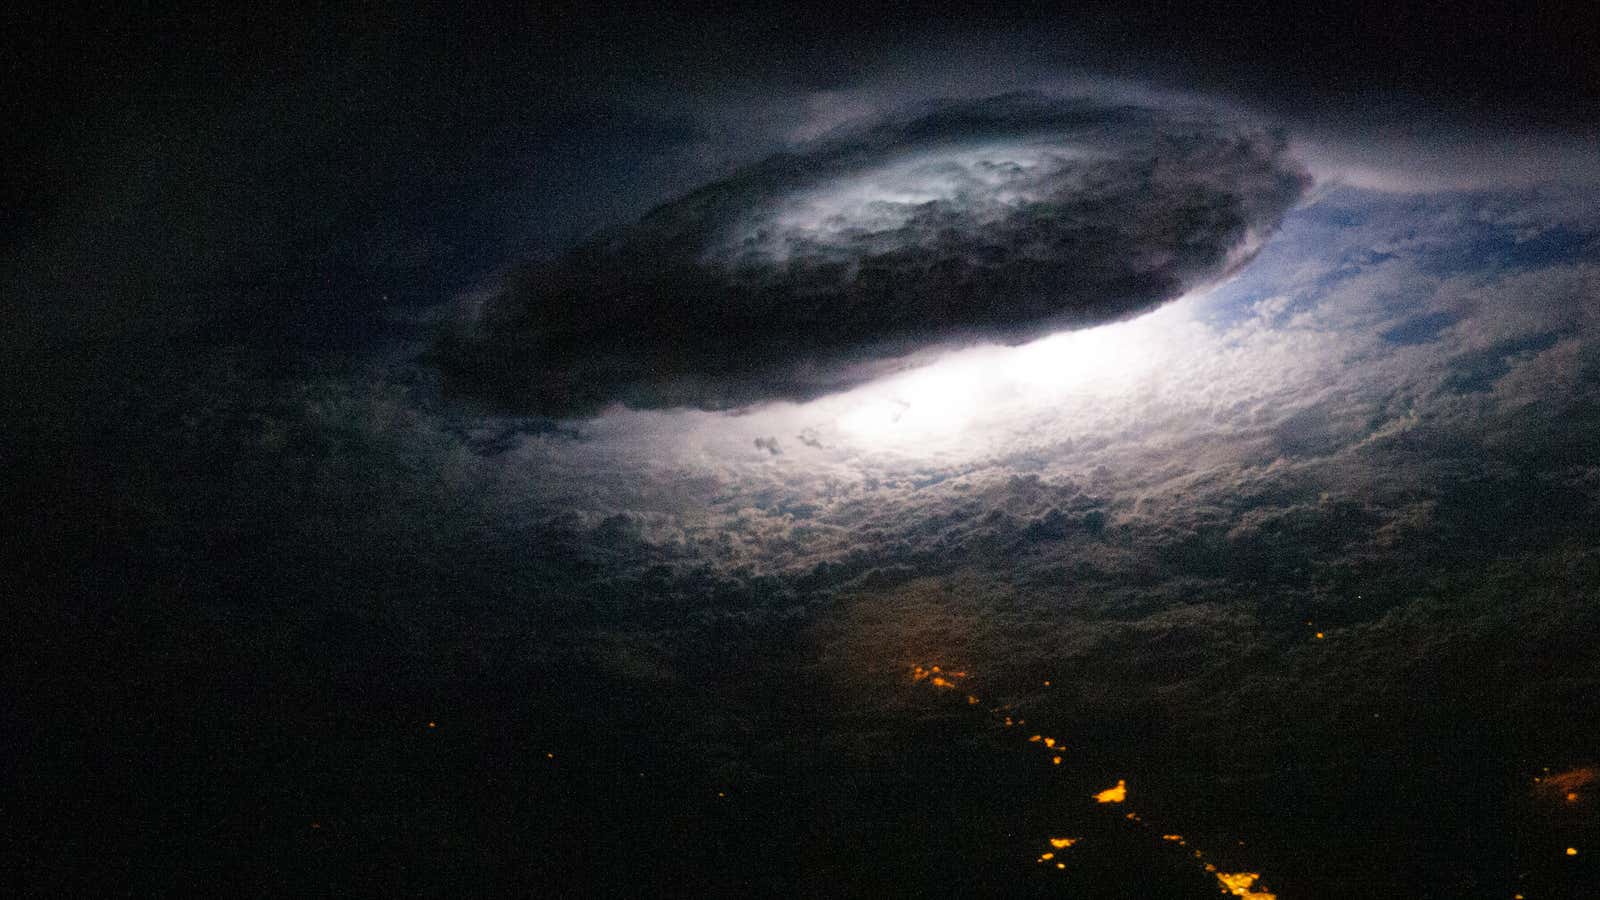 What lightning strikes look like from space